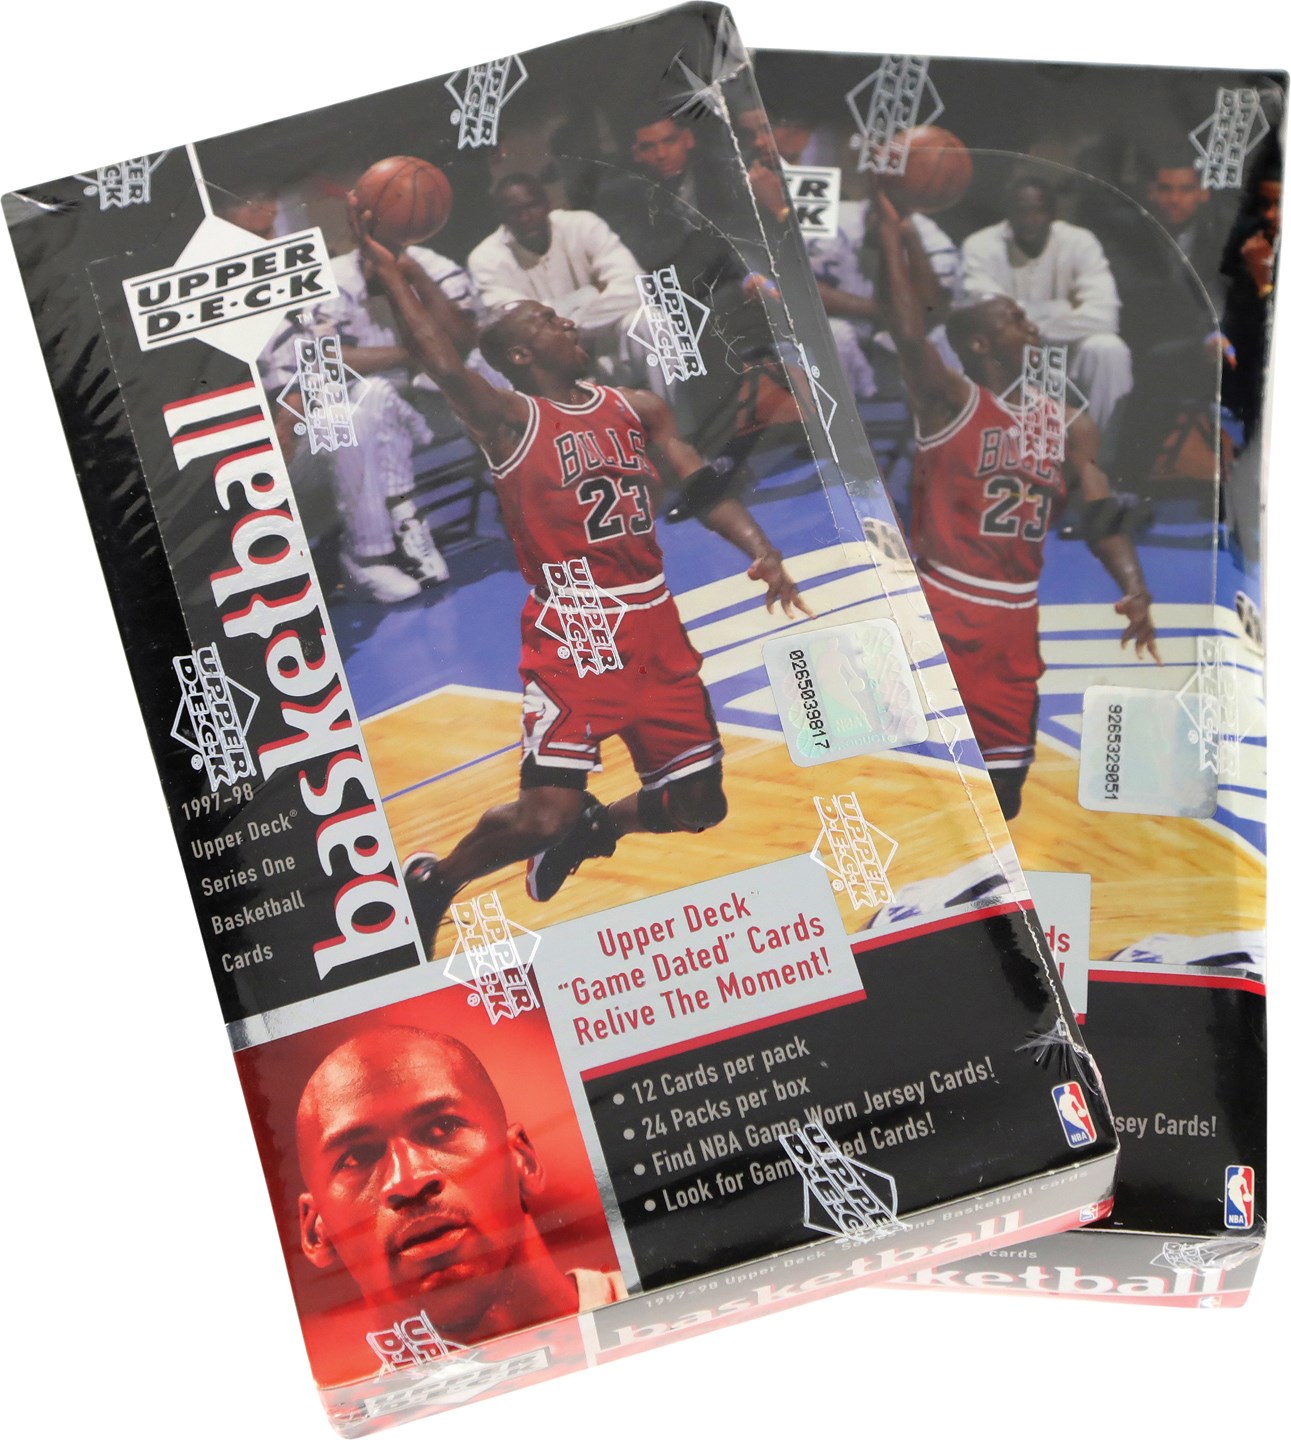 Unopened Boxes, Packs And Cases - 1997-1998 Upper Deck Basketball Series One Unopened Box Pair (2)